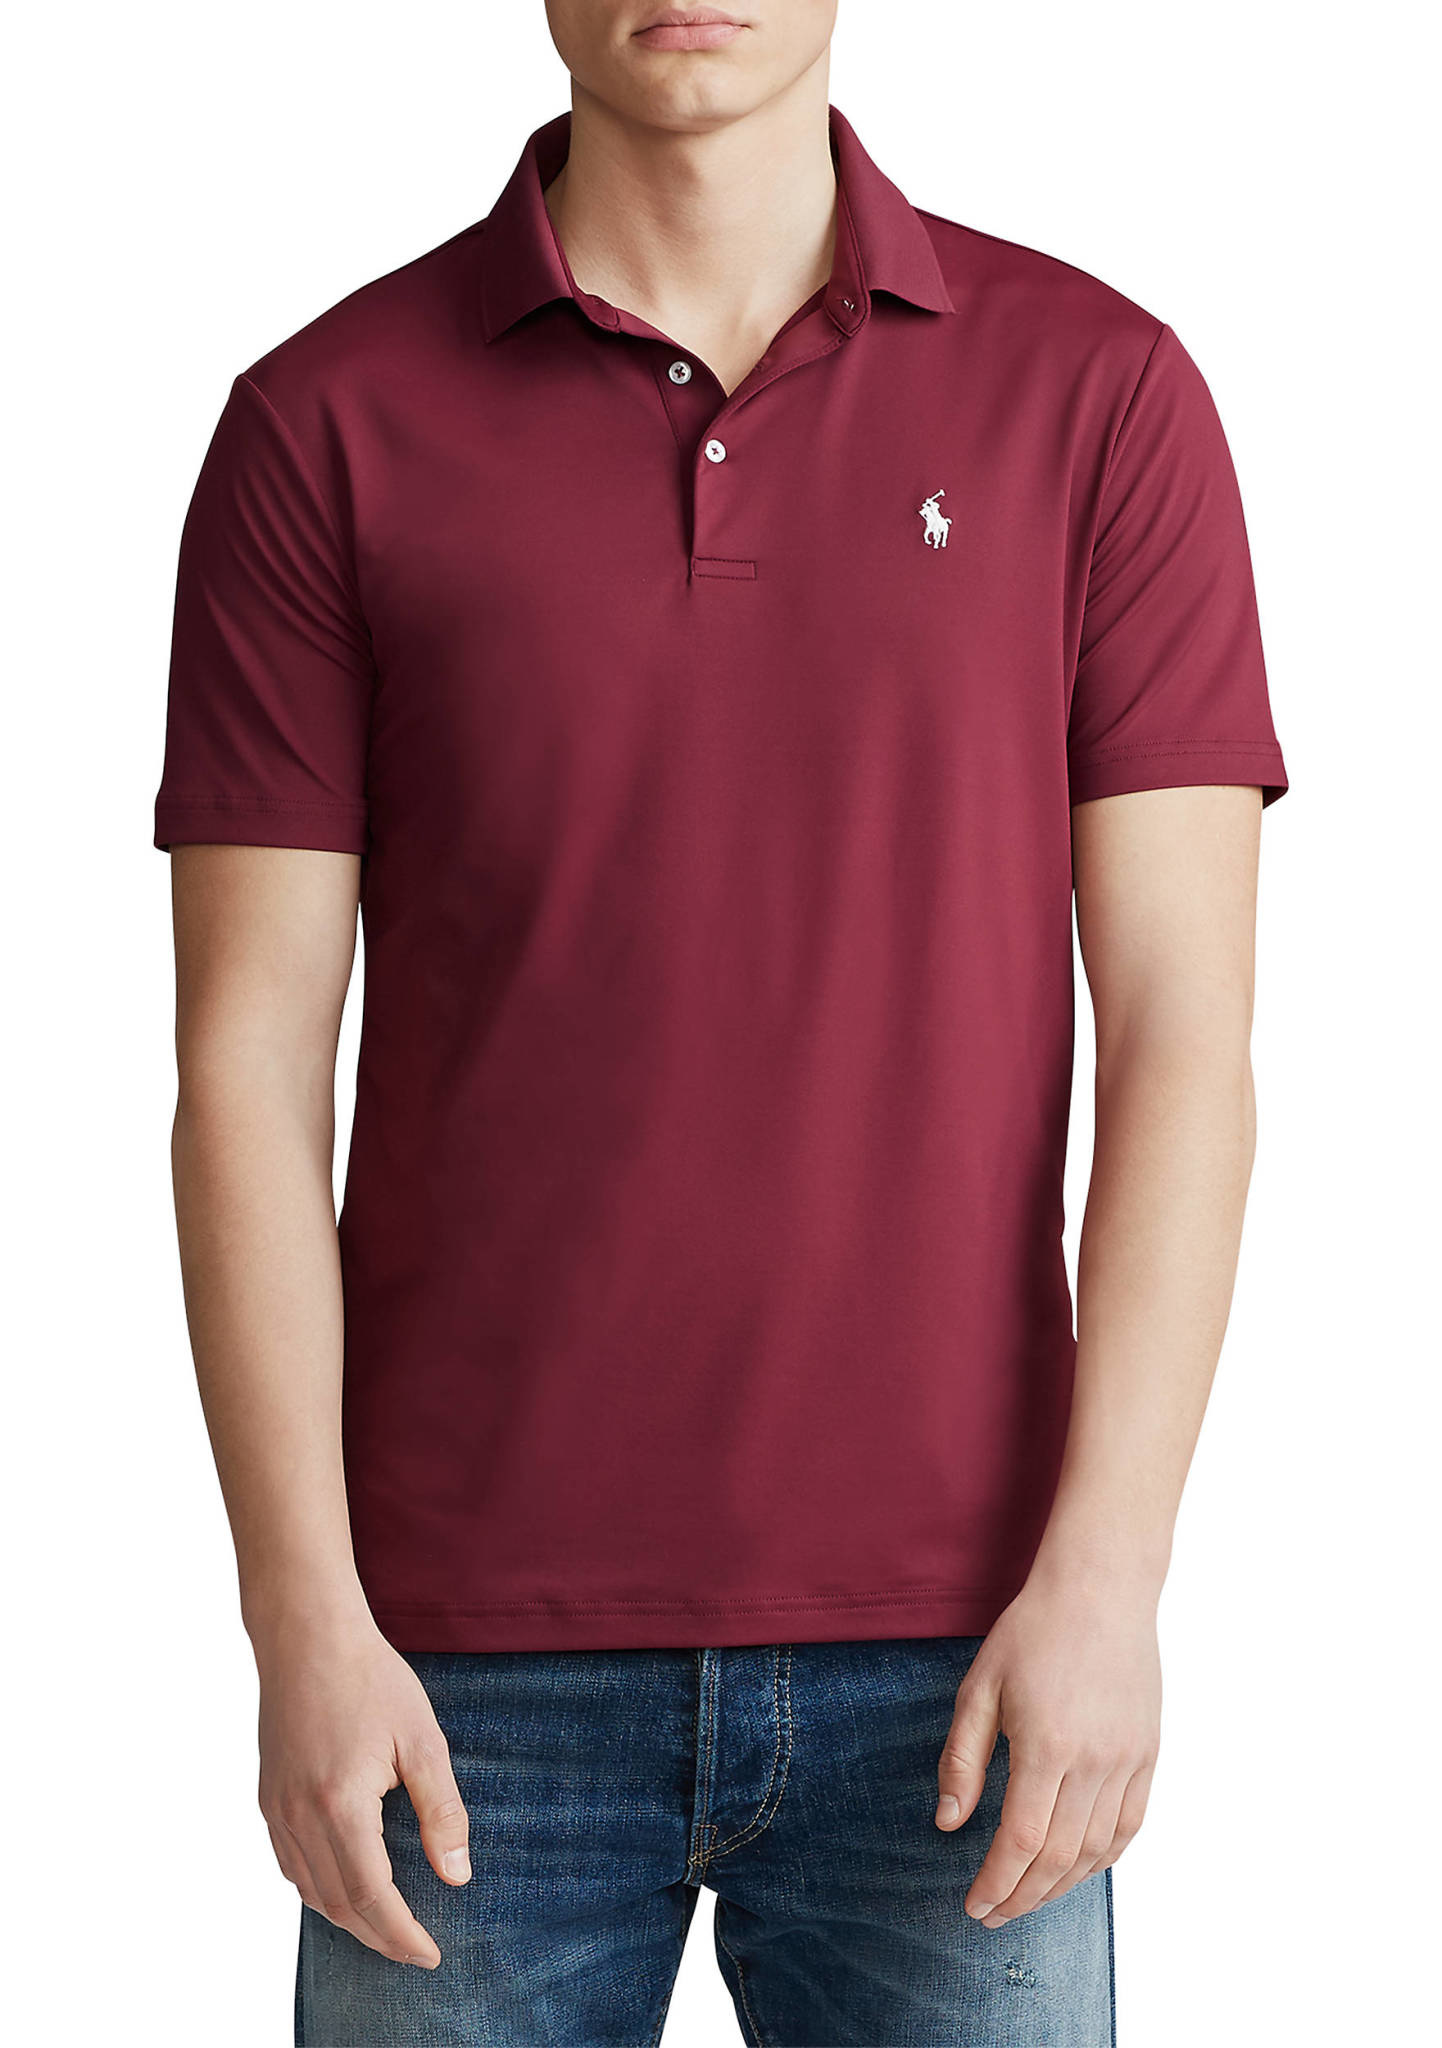 Polo Classic Fit Jersey Performance Polo Knit Shirt - Abraham's